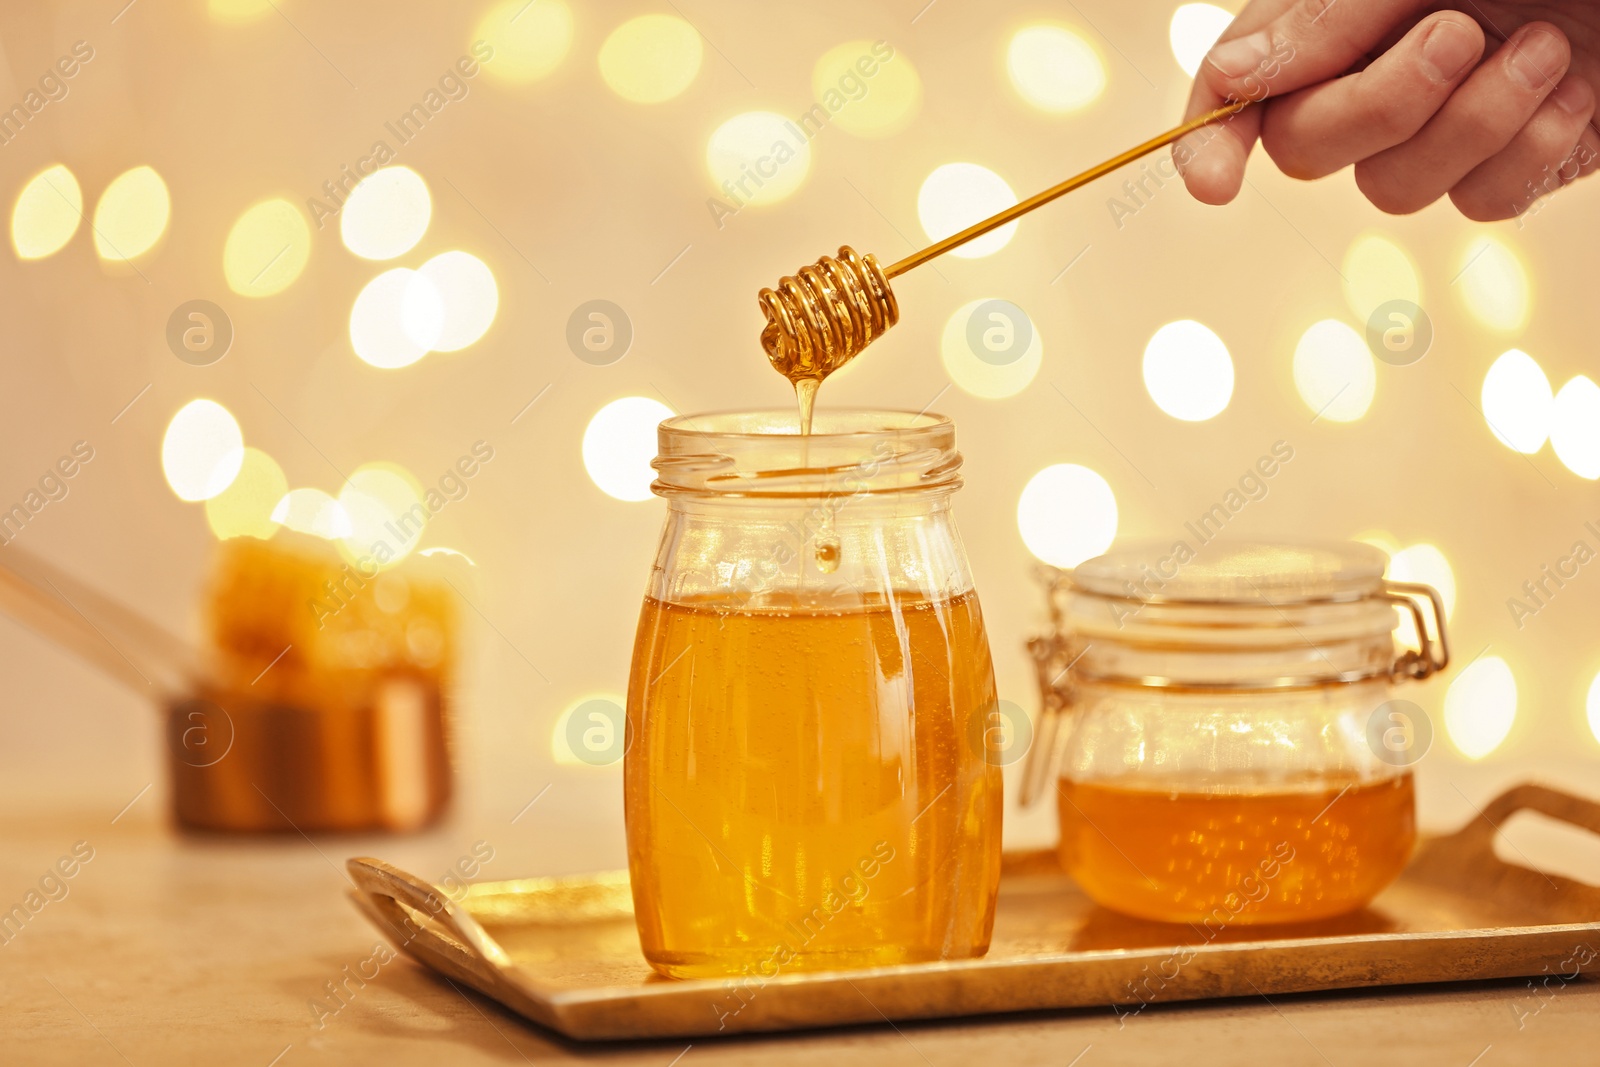 Photo of Woman holding dipper over jar with honey on table against blurred lights